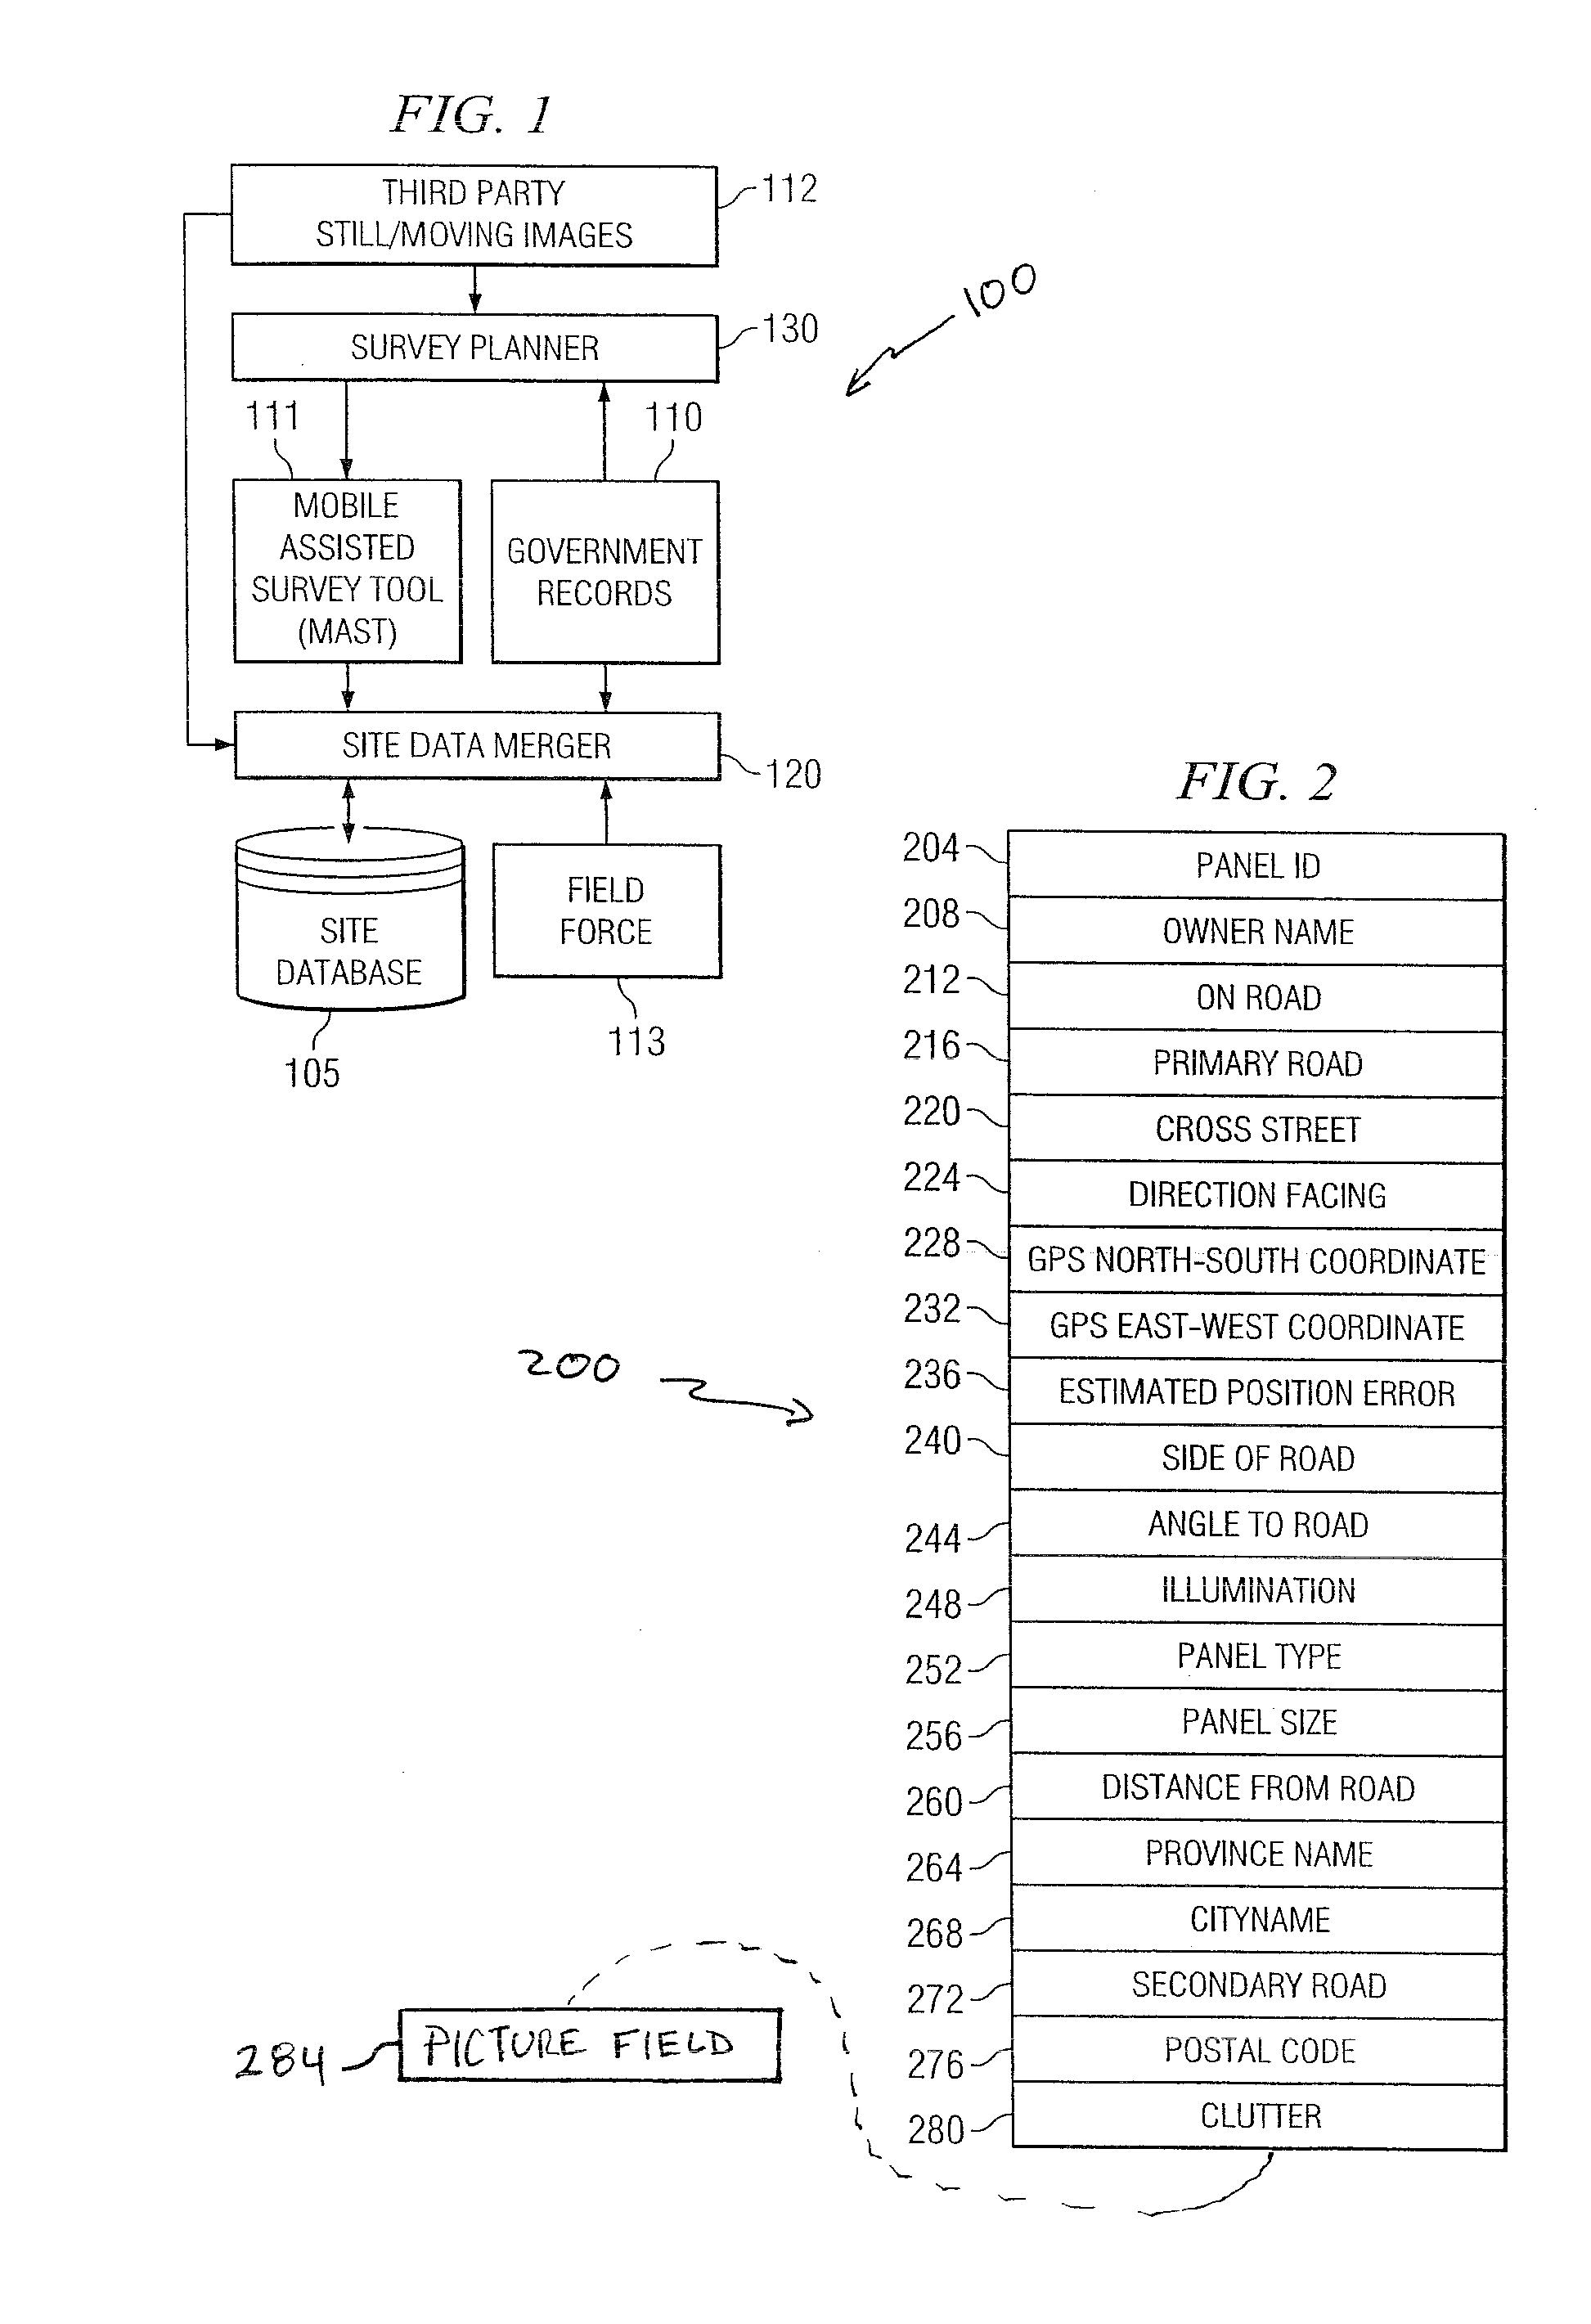 Methods and apparatus for collecting media site data